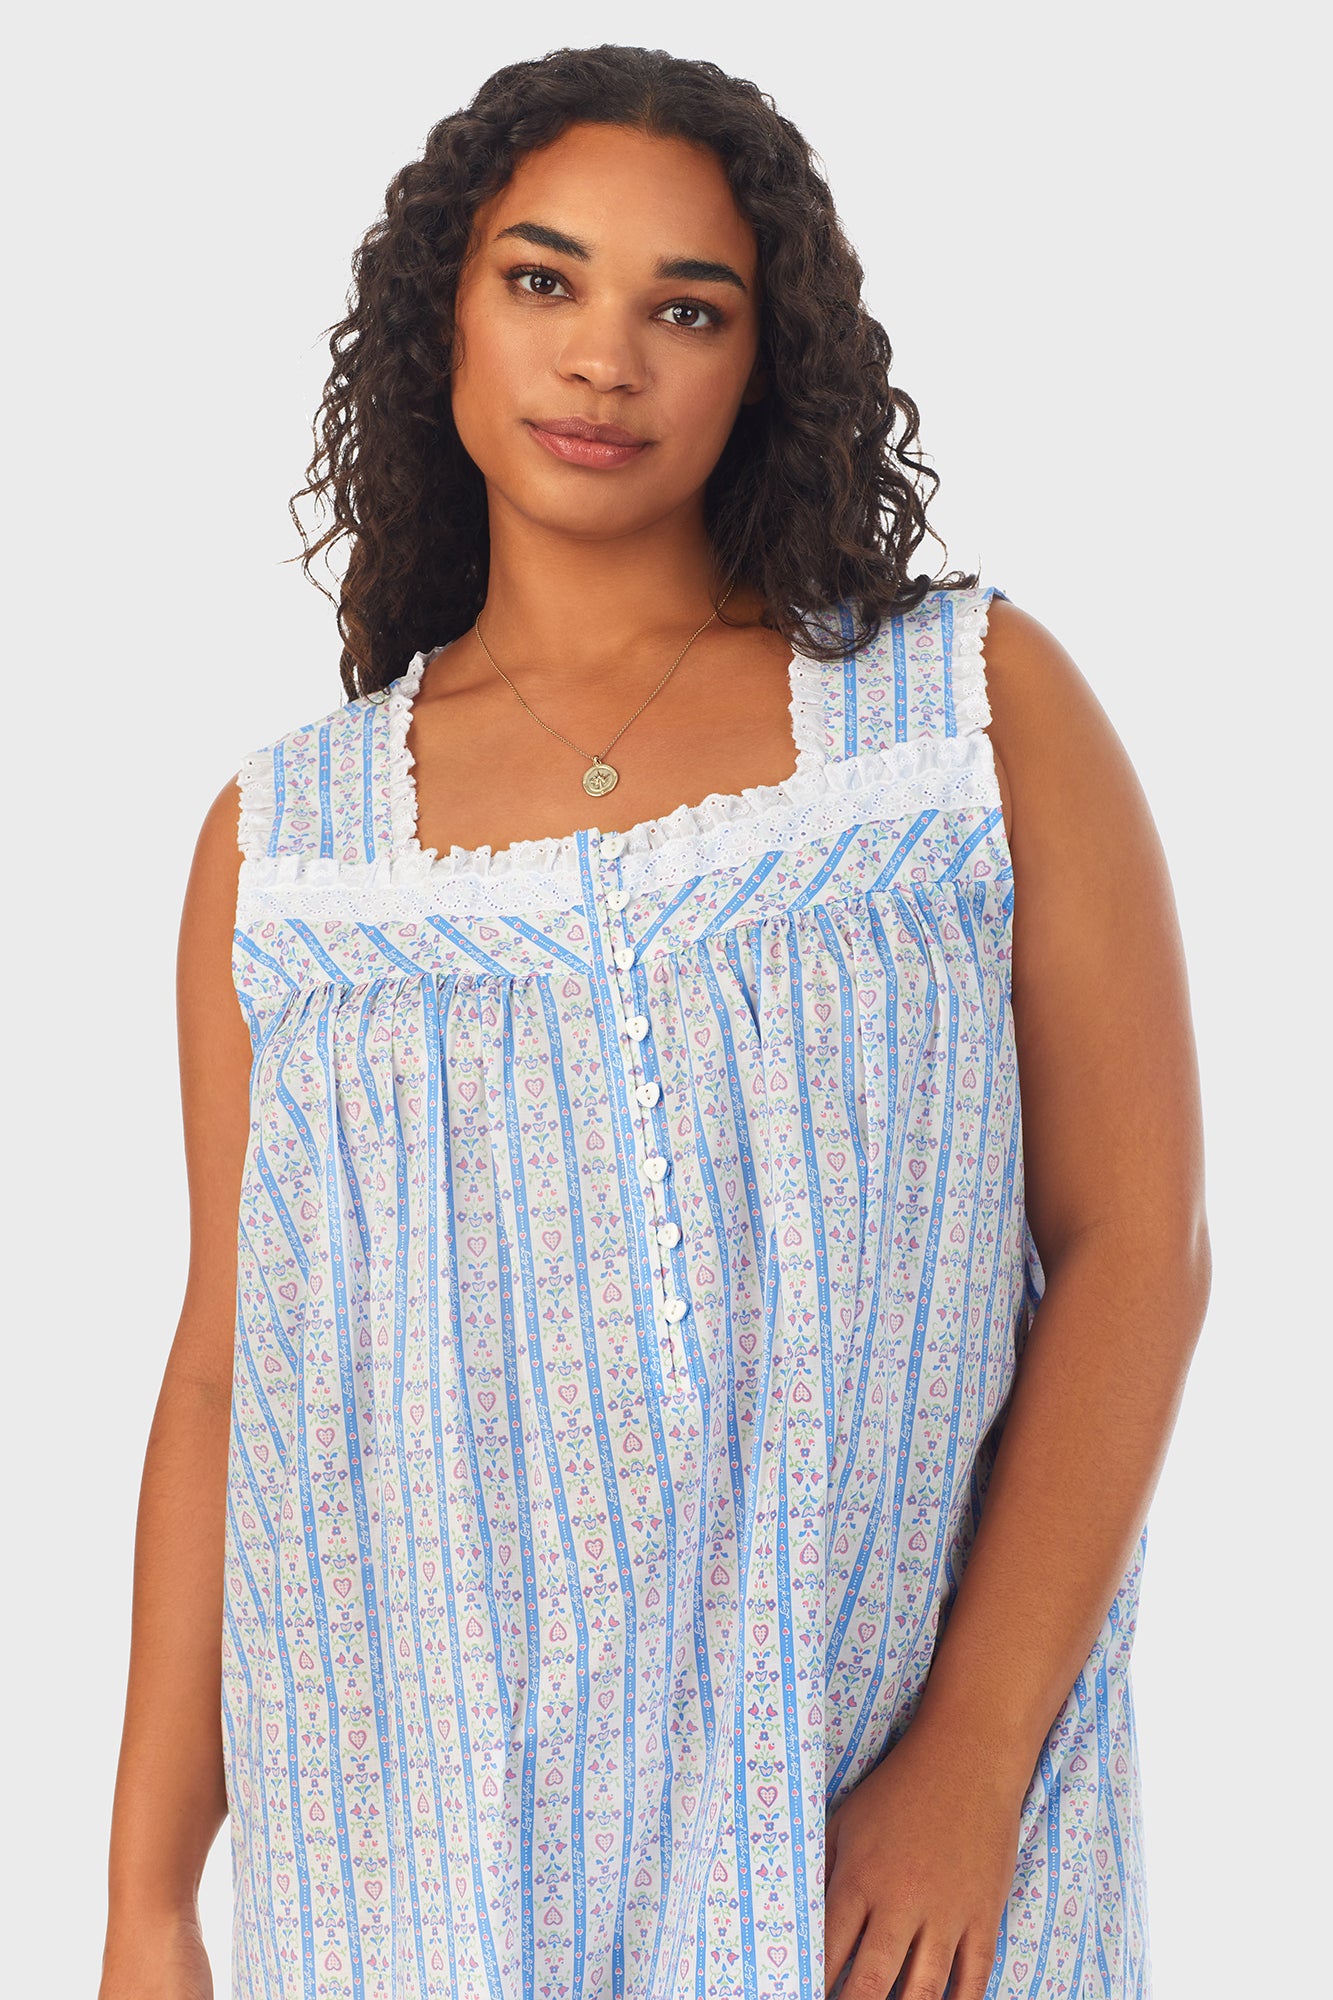 A lady wearing white long nightgown with blue pattern